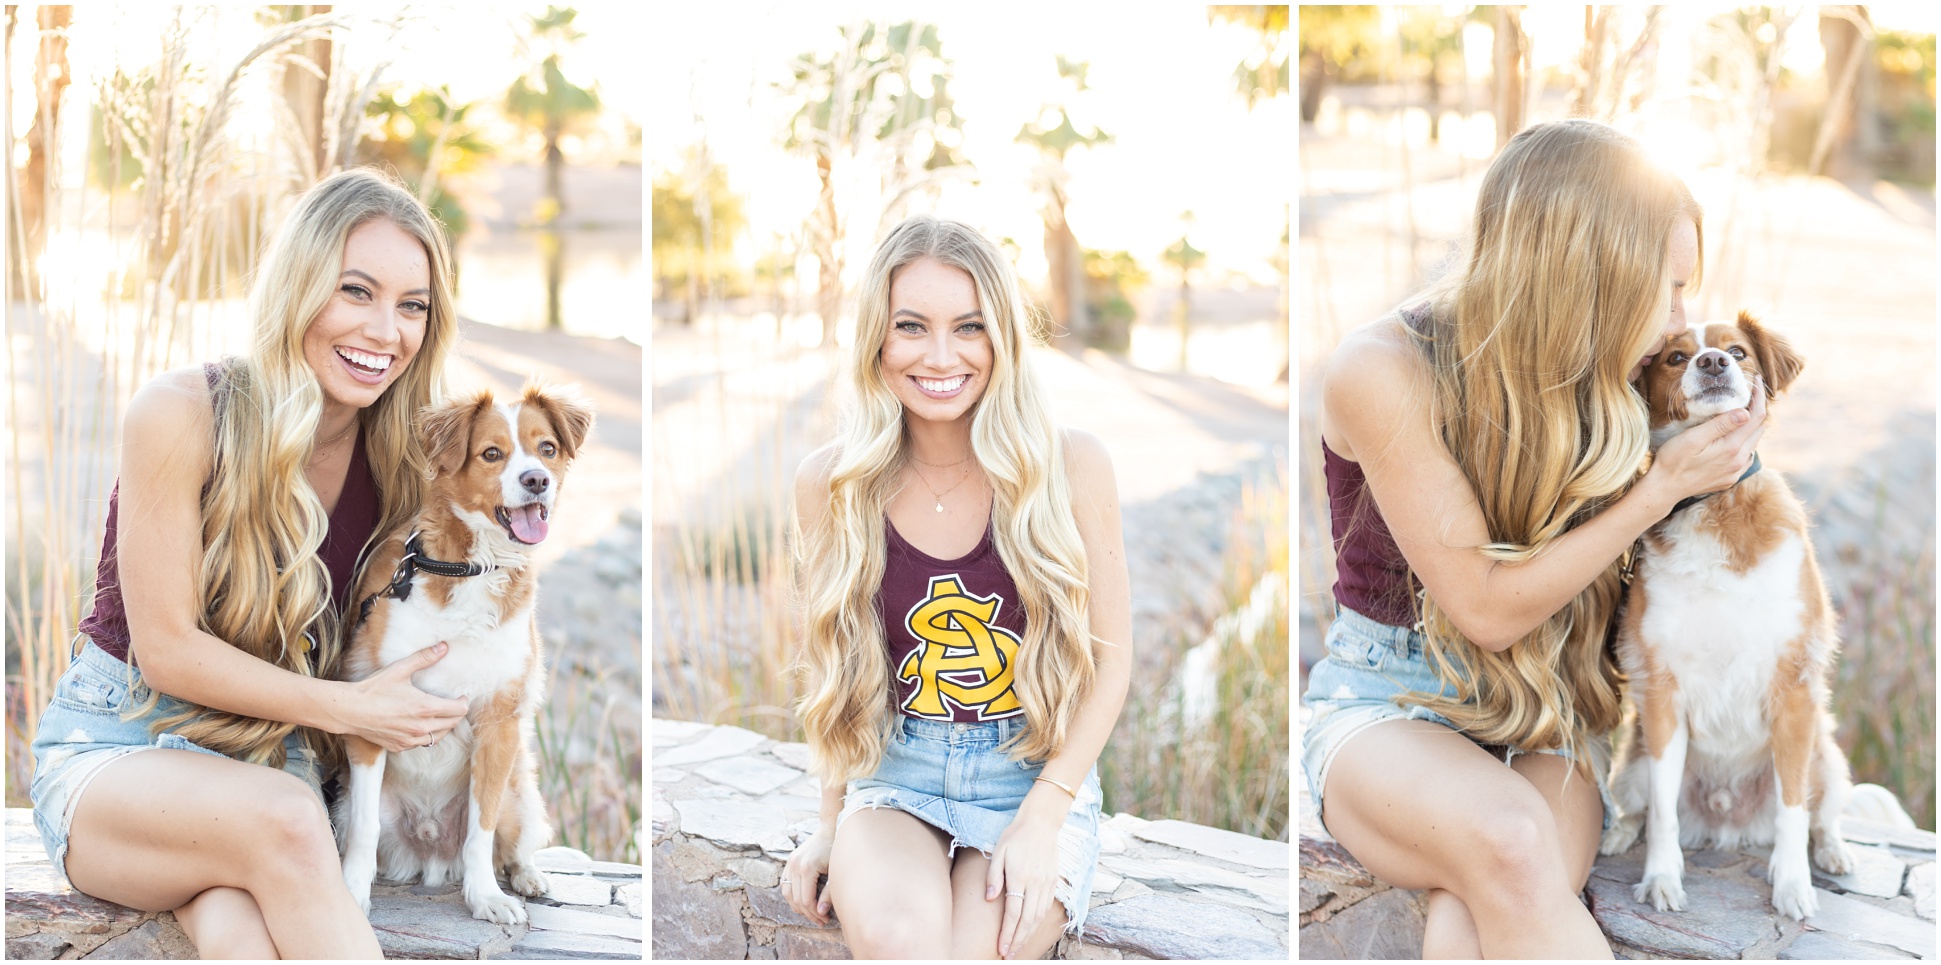 Three Images of Ally Bascom's Graduation Portraits from ASU with her Dog